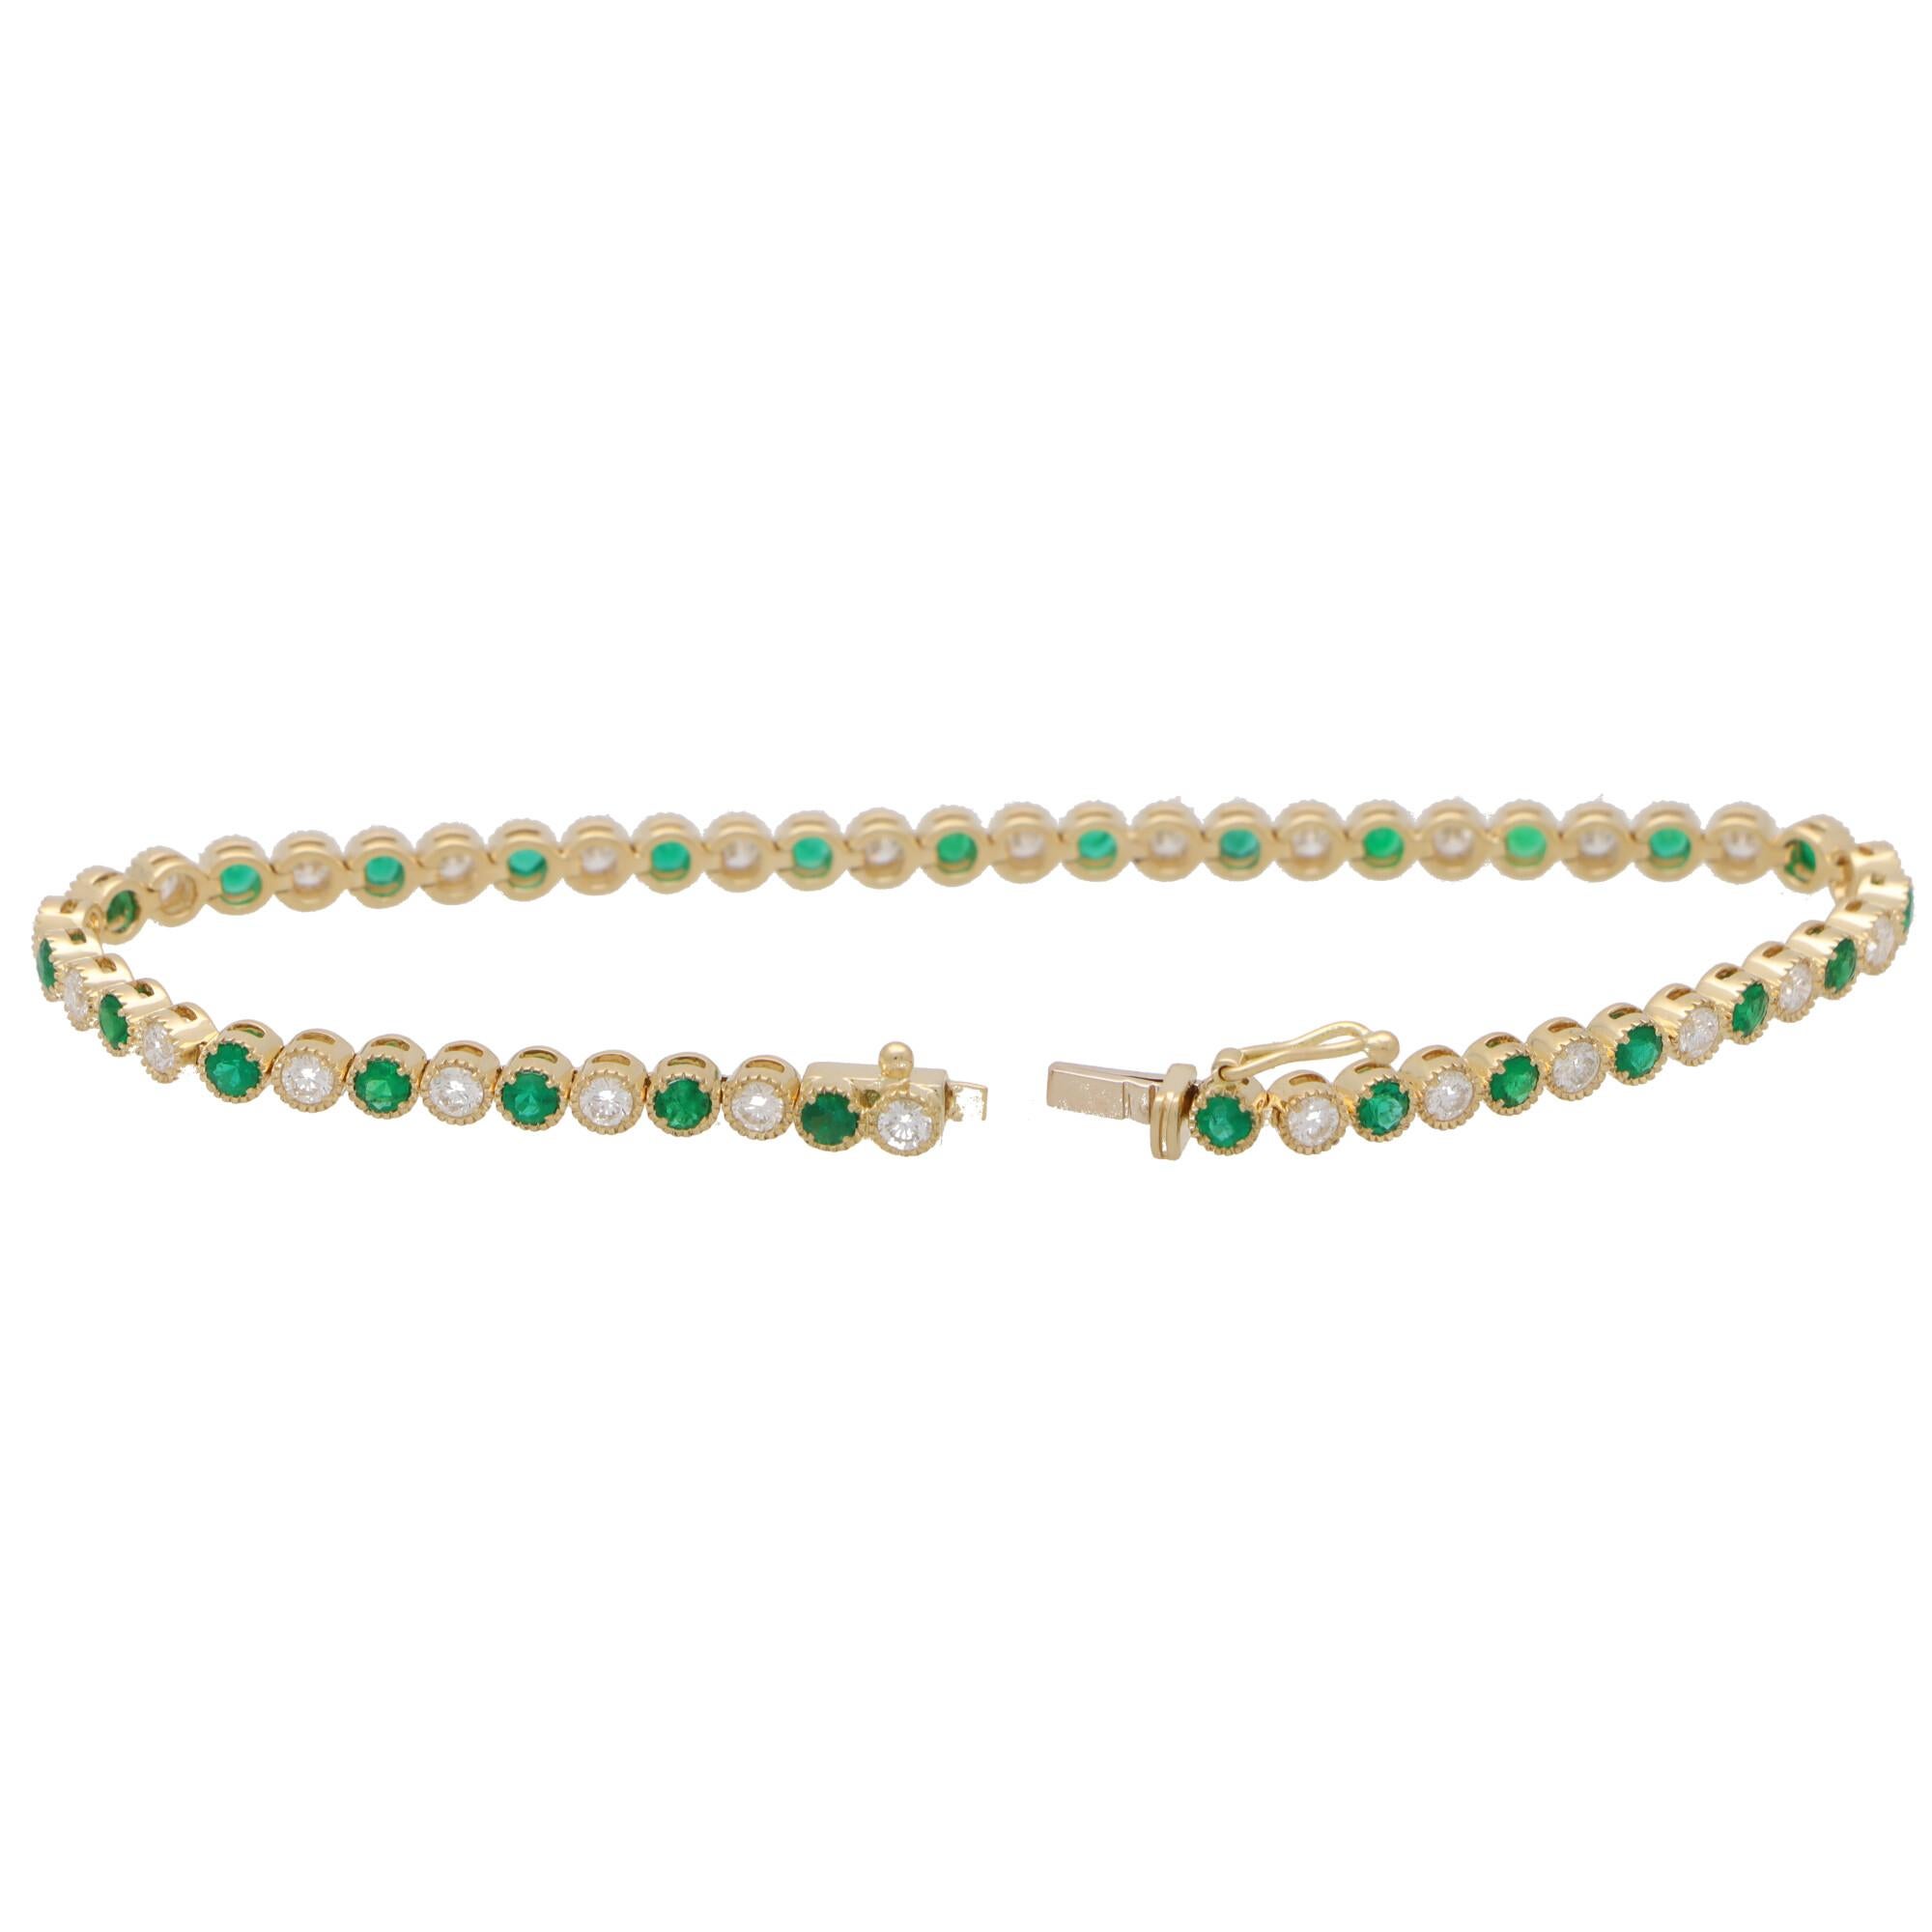 A beautiful contemporary diamond and emerald line bracelet set in 18k  yellow gold.

The bracelet is composed of a grand total of 27 round brilliant cut diamonds and 27 round cut vibrant emerald stones. All of the stones are securely bezel set in